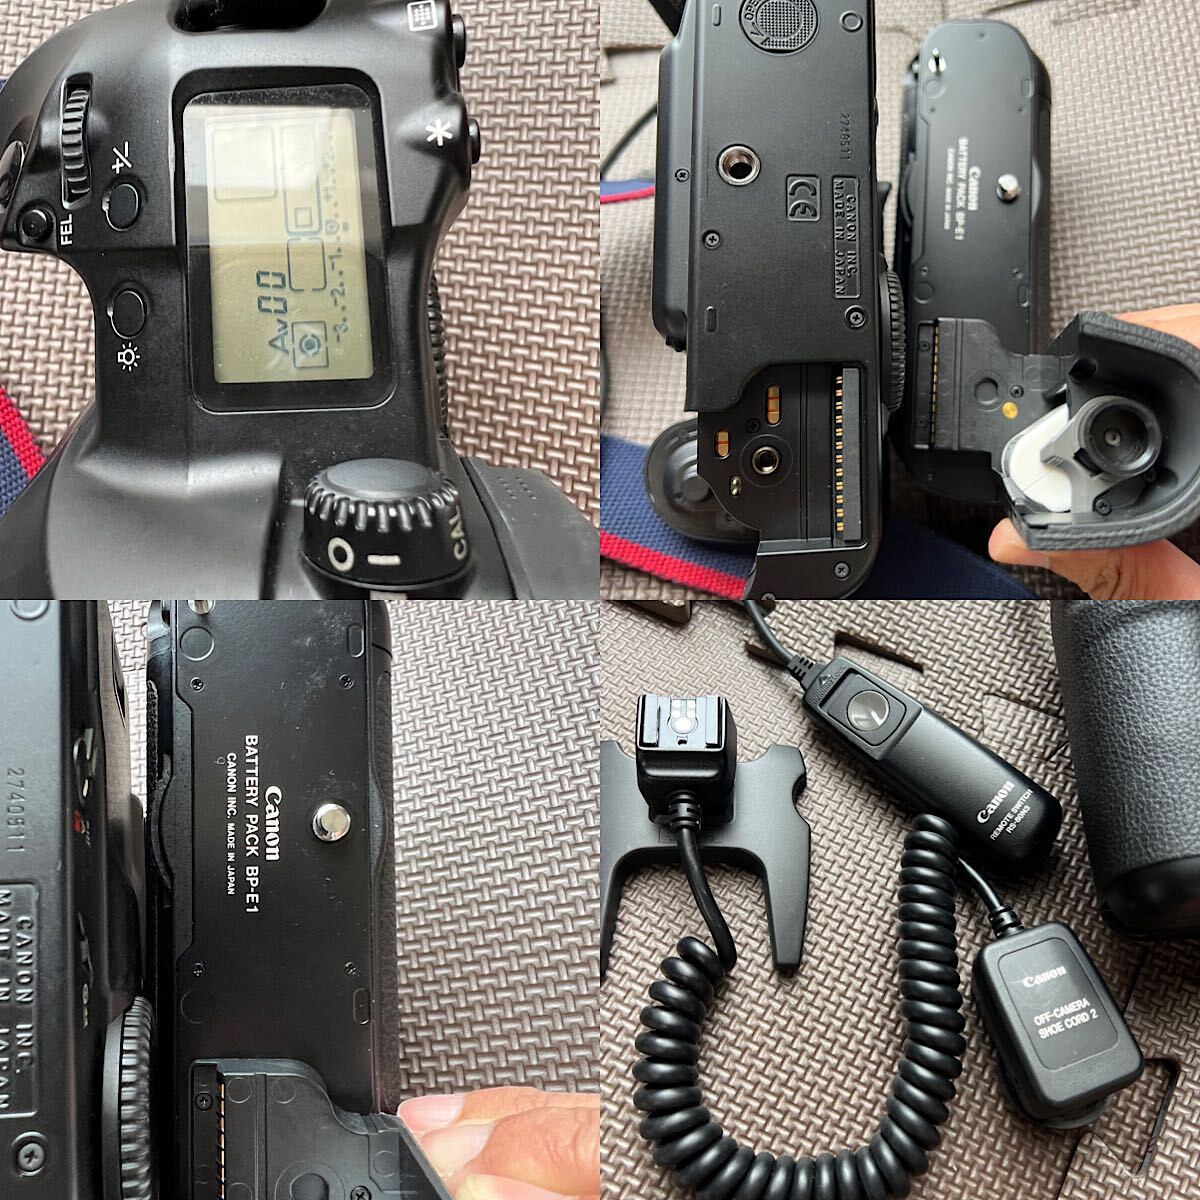 Canon EOS 3 フィルムカメラ本体、BATTERY PACK BP-E1 、REMOTE SWITCH RS-80N3、OFF-CAMERA SHOE CORD 2 、セット 中古品の画像3